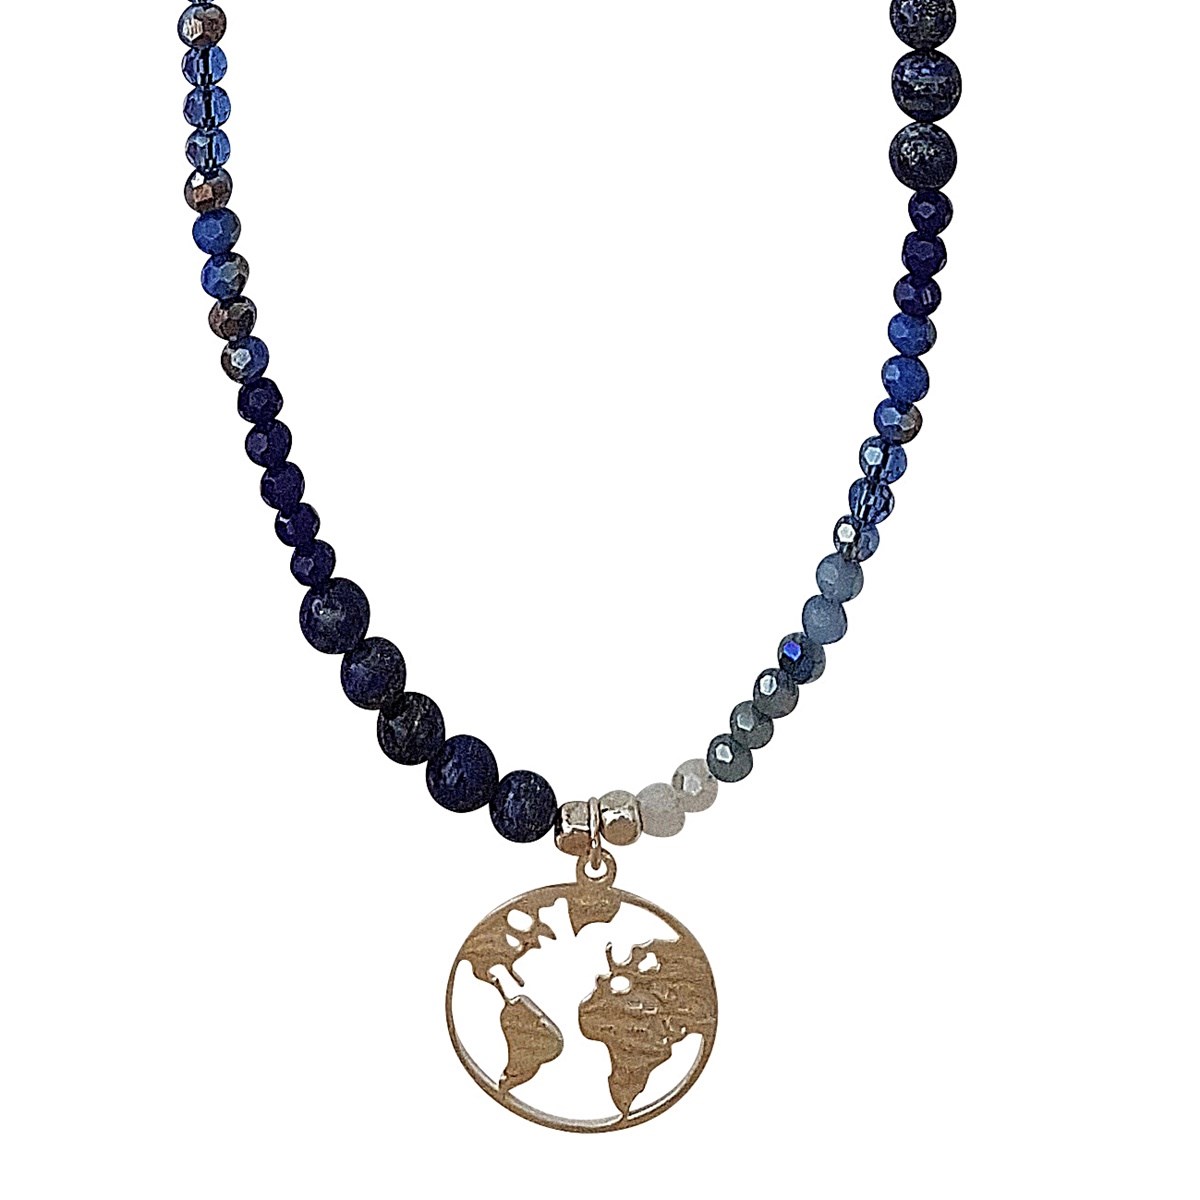 Collier map monde fly